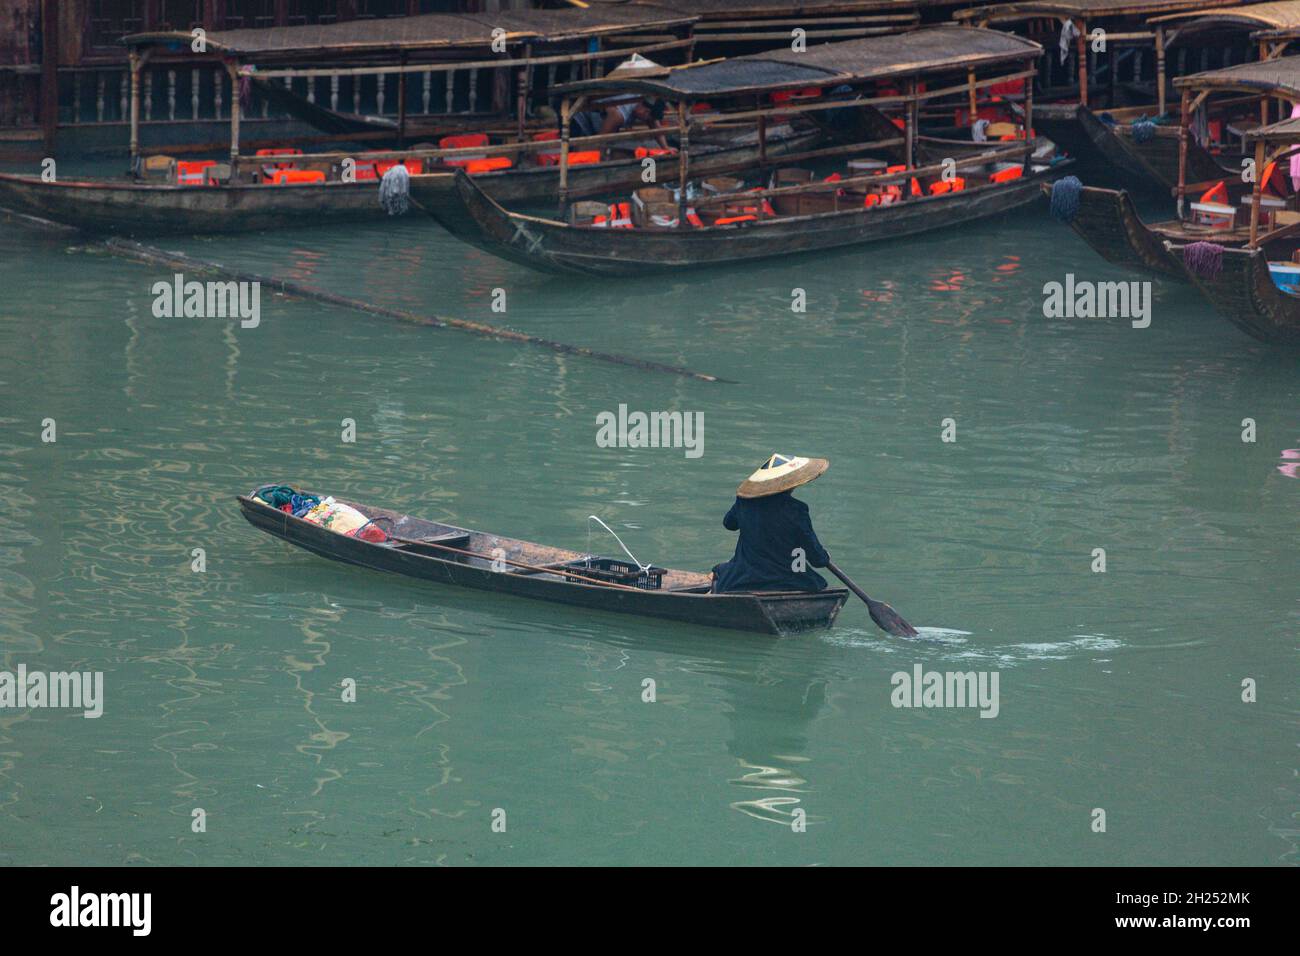 A man in a traditional conical hat paddles a sampan on the Tuojiang River in Fenghuang, China. Stock Photo